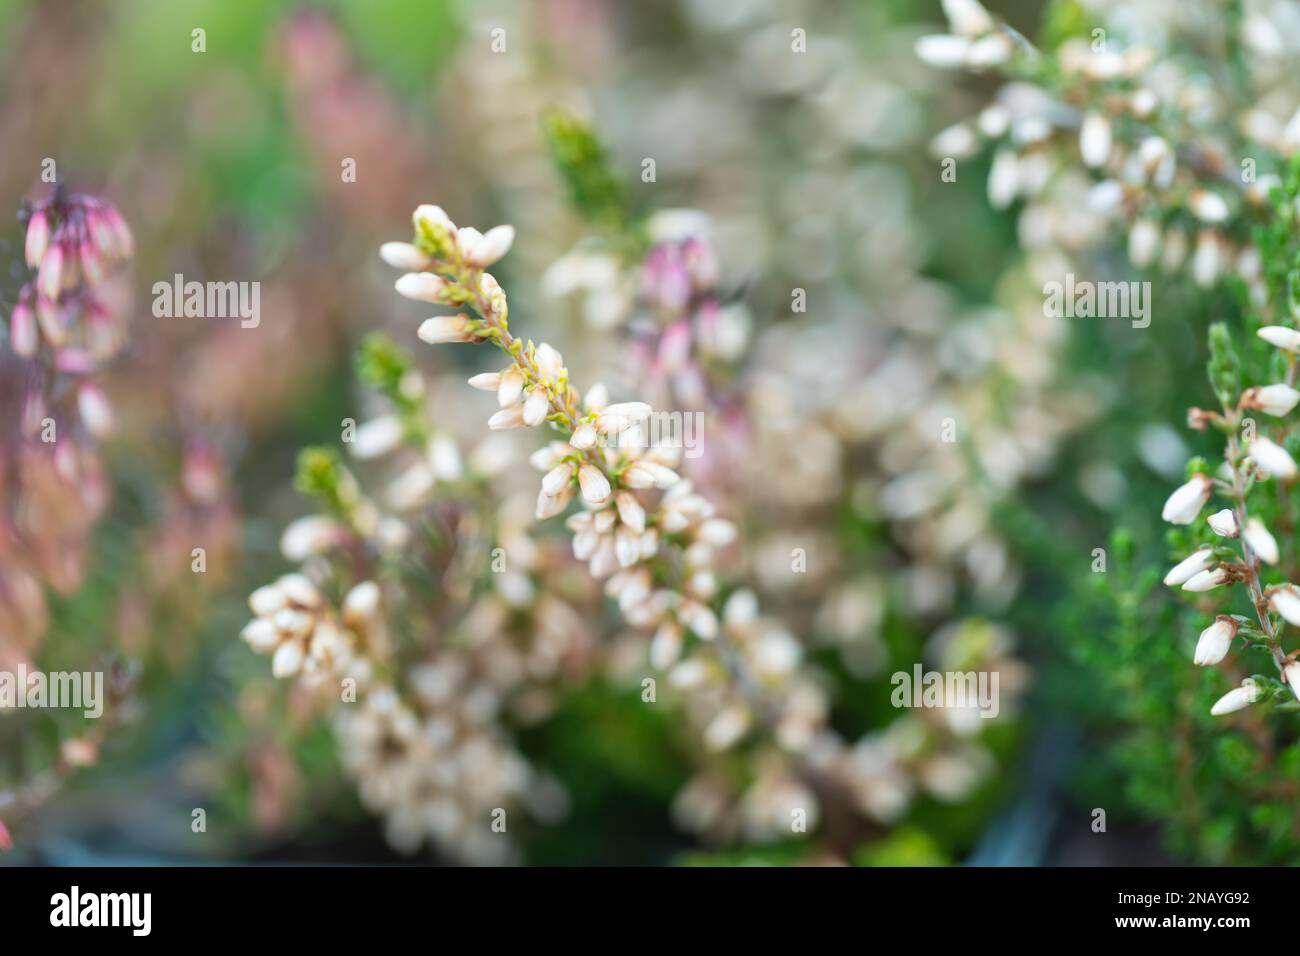 Close-up of a colourful heather plant , Erica carnea f. alba ' Springwood White' growing in a garden (with background blur). Stock Photo